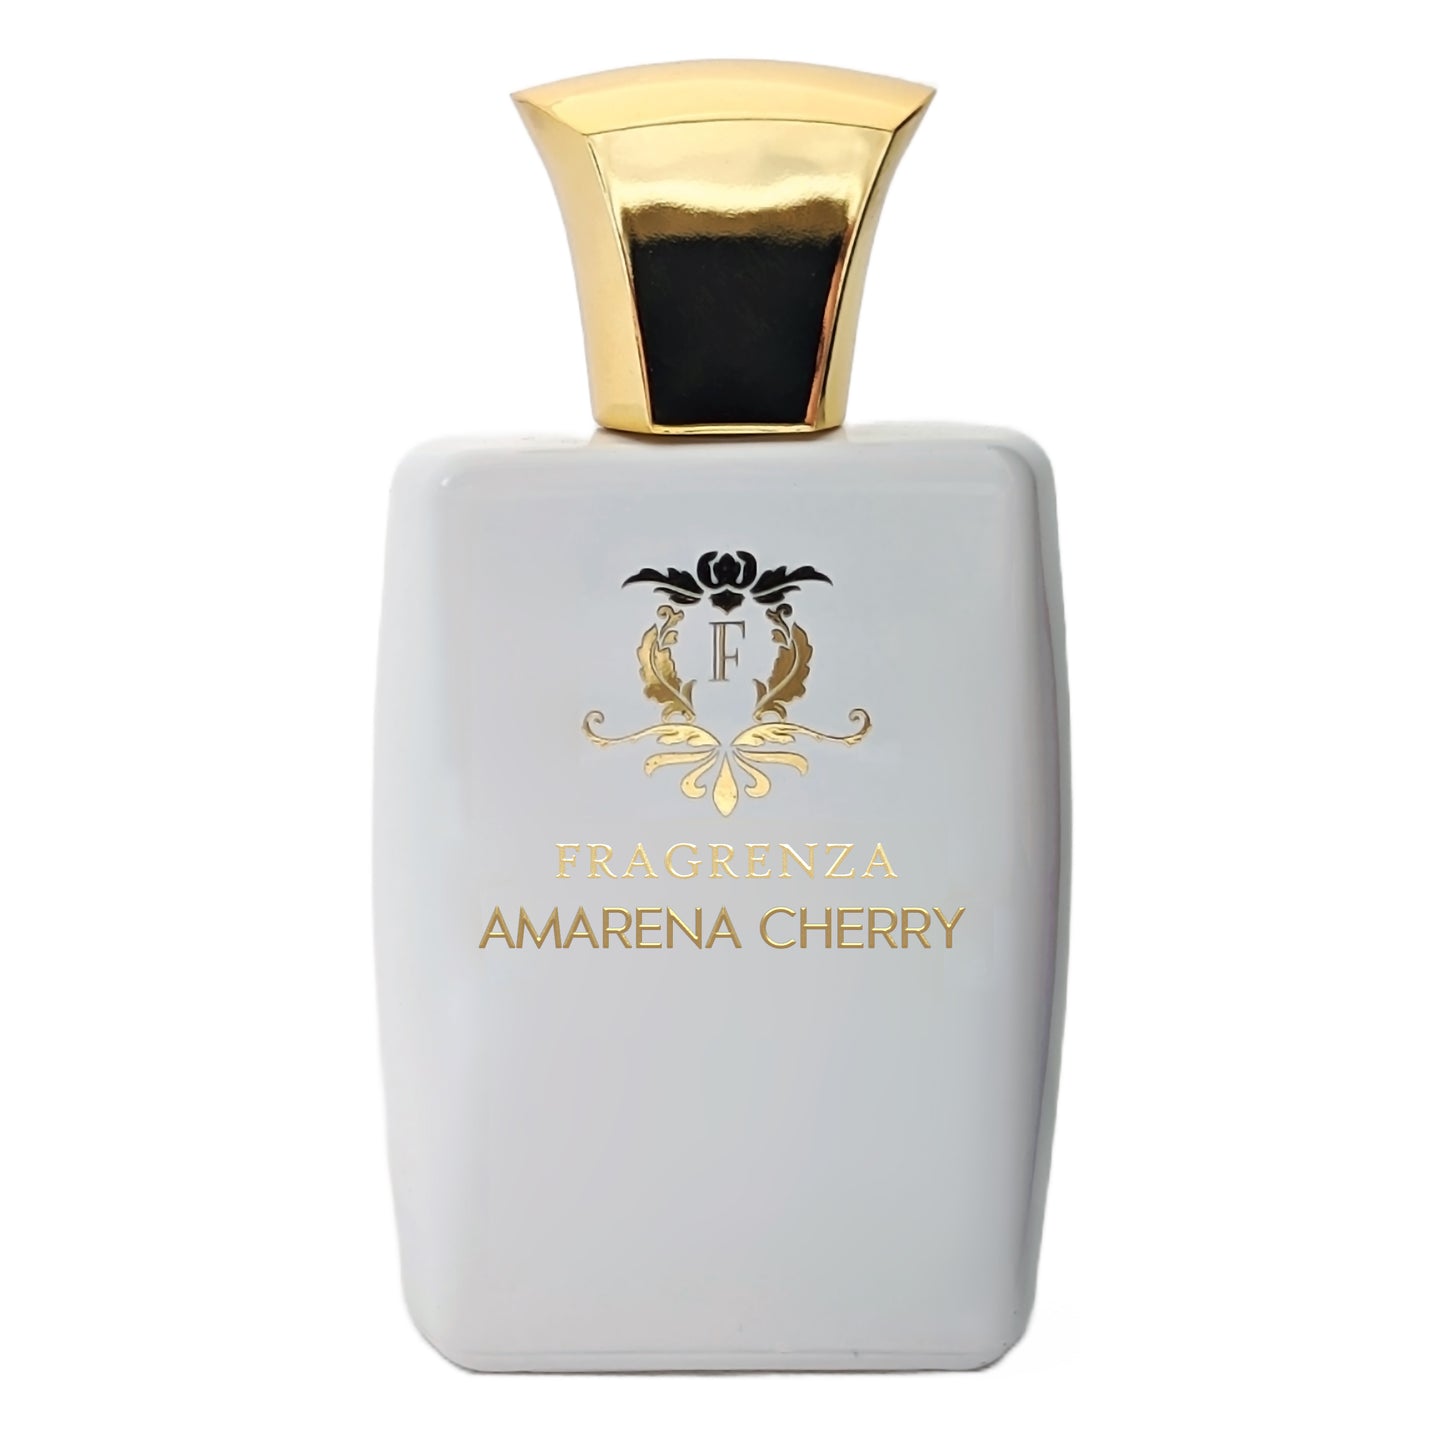 Tom Ford Lost Cherry Inspired Luxe Fragrance - Amarena Cherry – Fragrenza